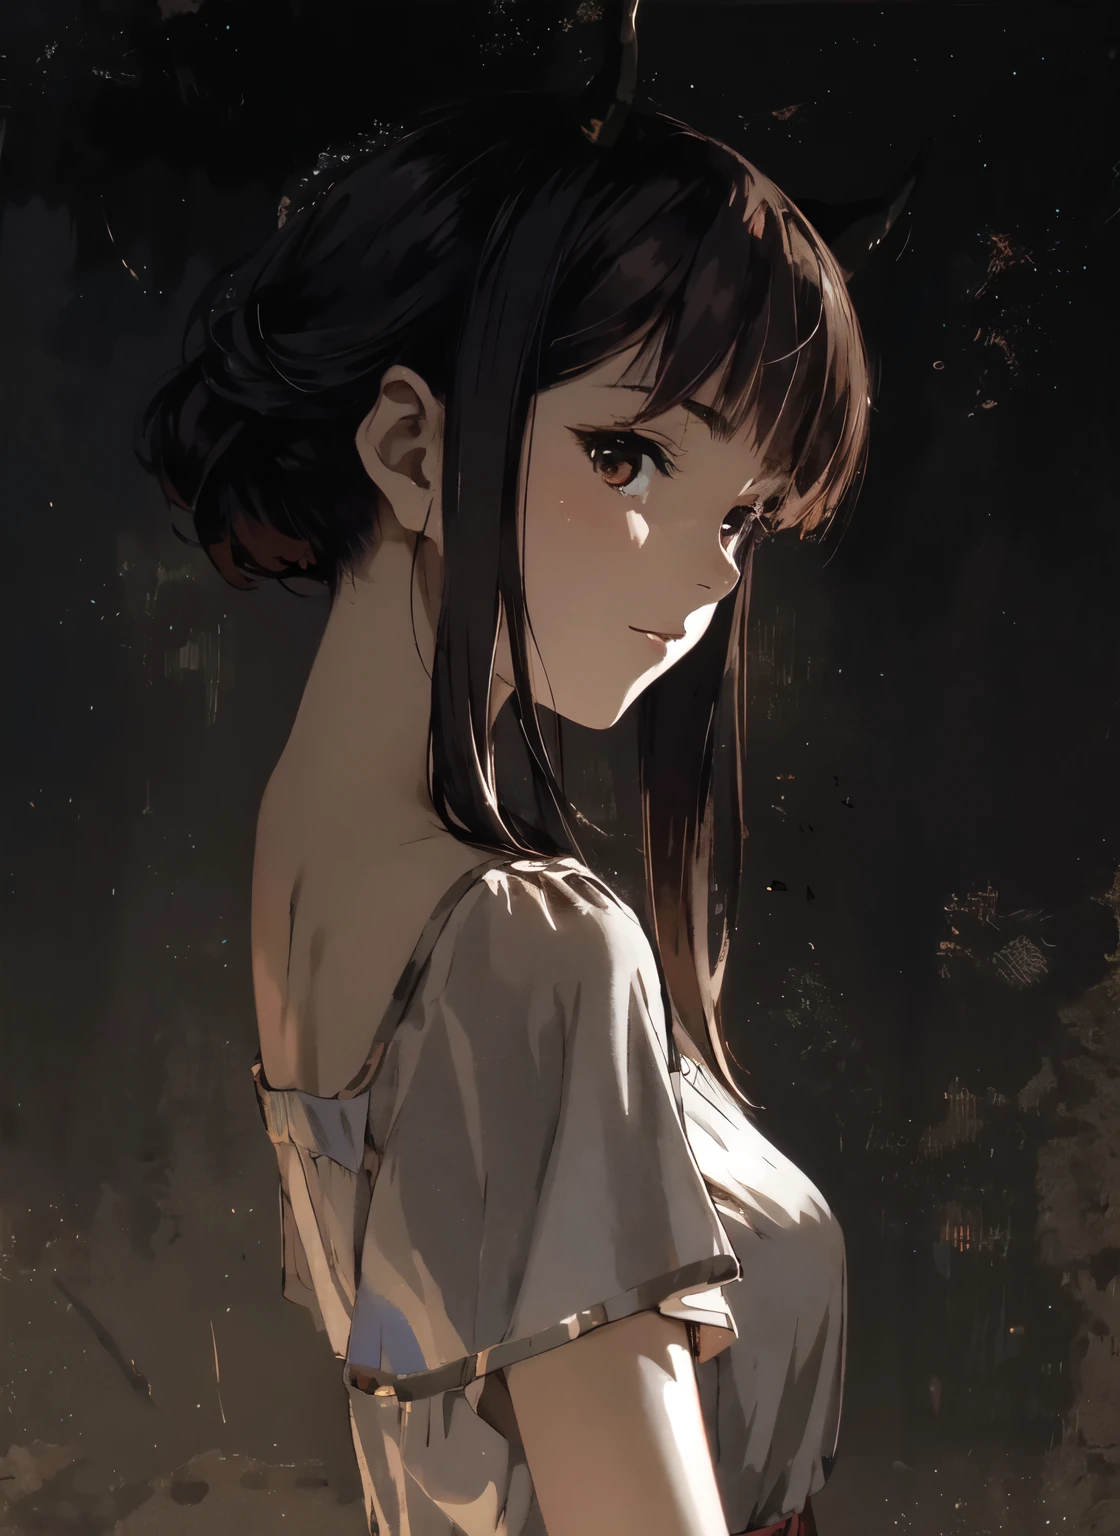 He has short brown hair with two horns sticking out from the bottom of his hair.、Anime girl in a white dress in front of a dark background, Gwaites style artwork, anime girl profile, portrait anime girl, beautiful anime portrait, Watching the viewer, 